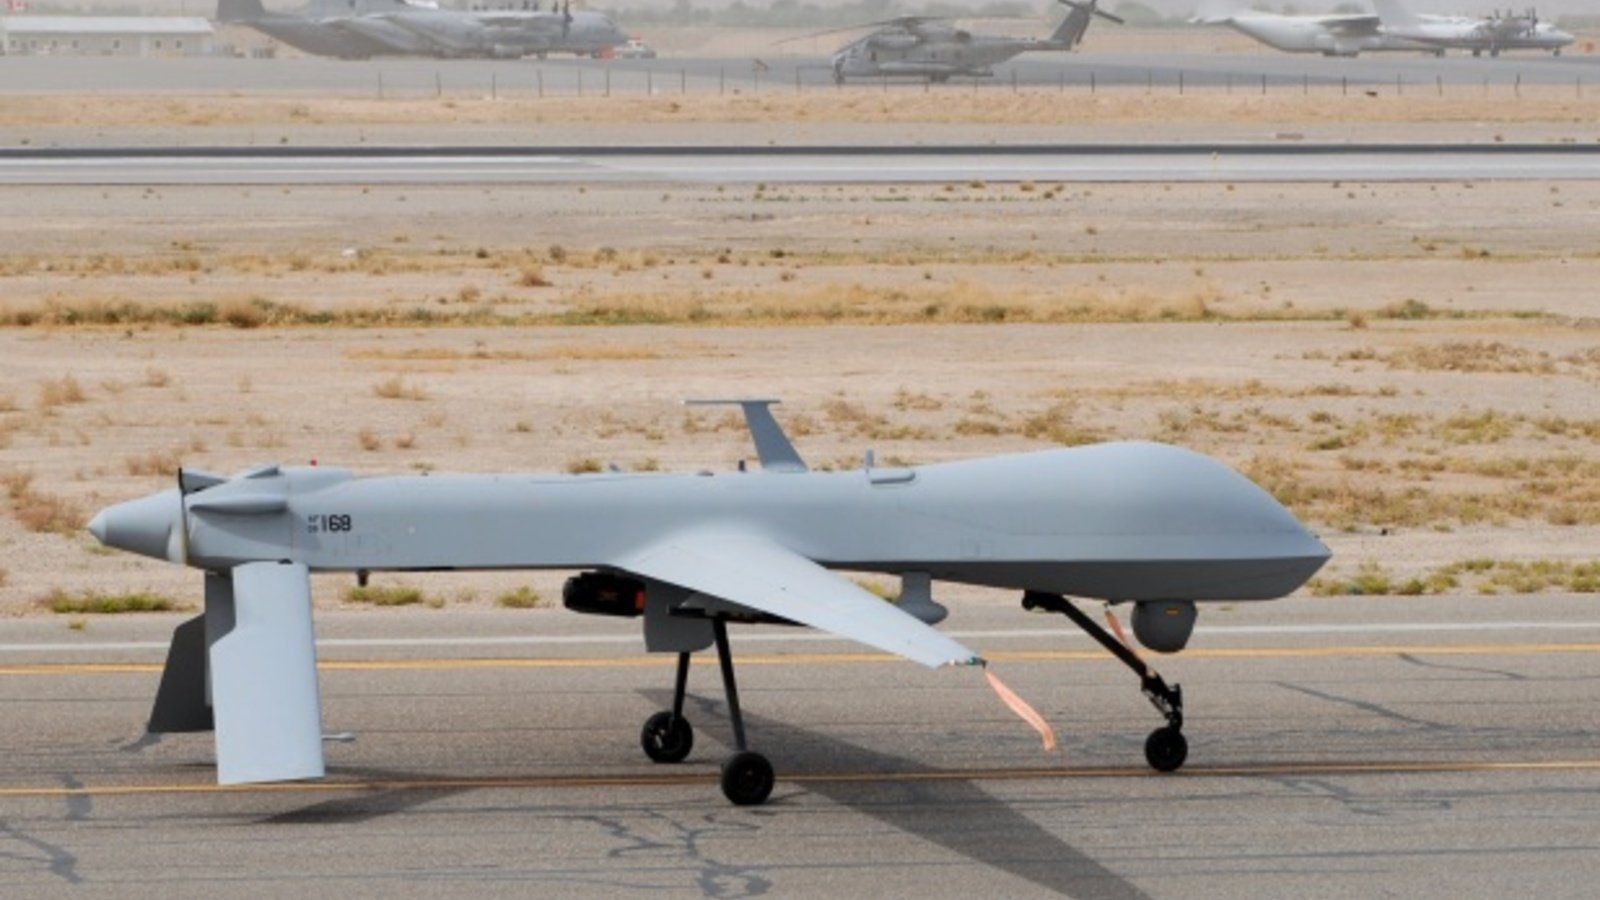 You Might Have Missed: Drones, Drones, and Drones. Council on Foreign Relations